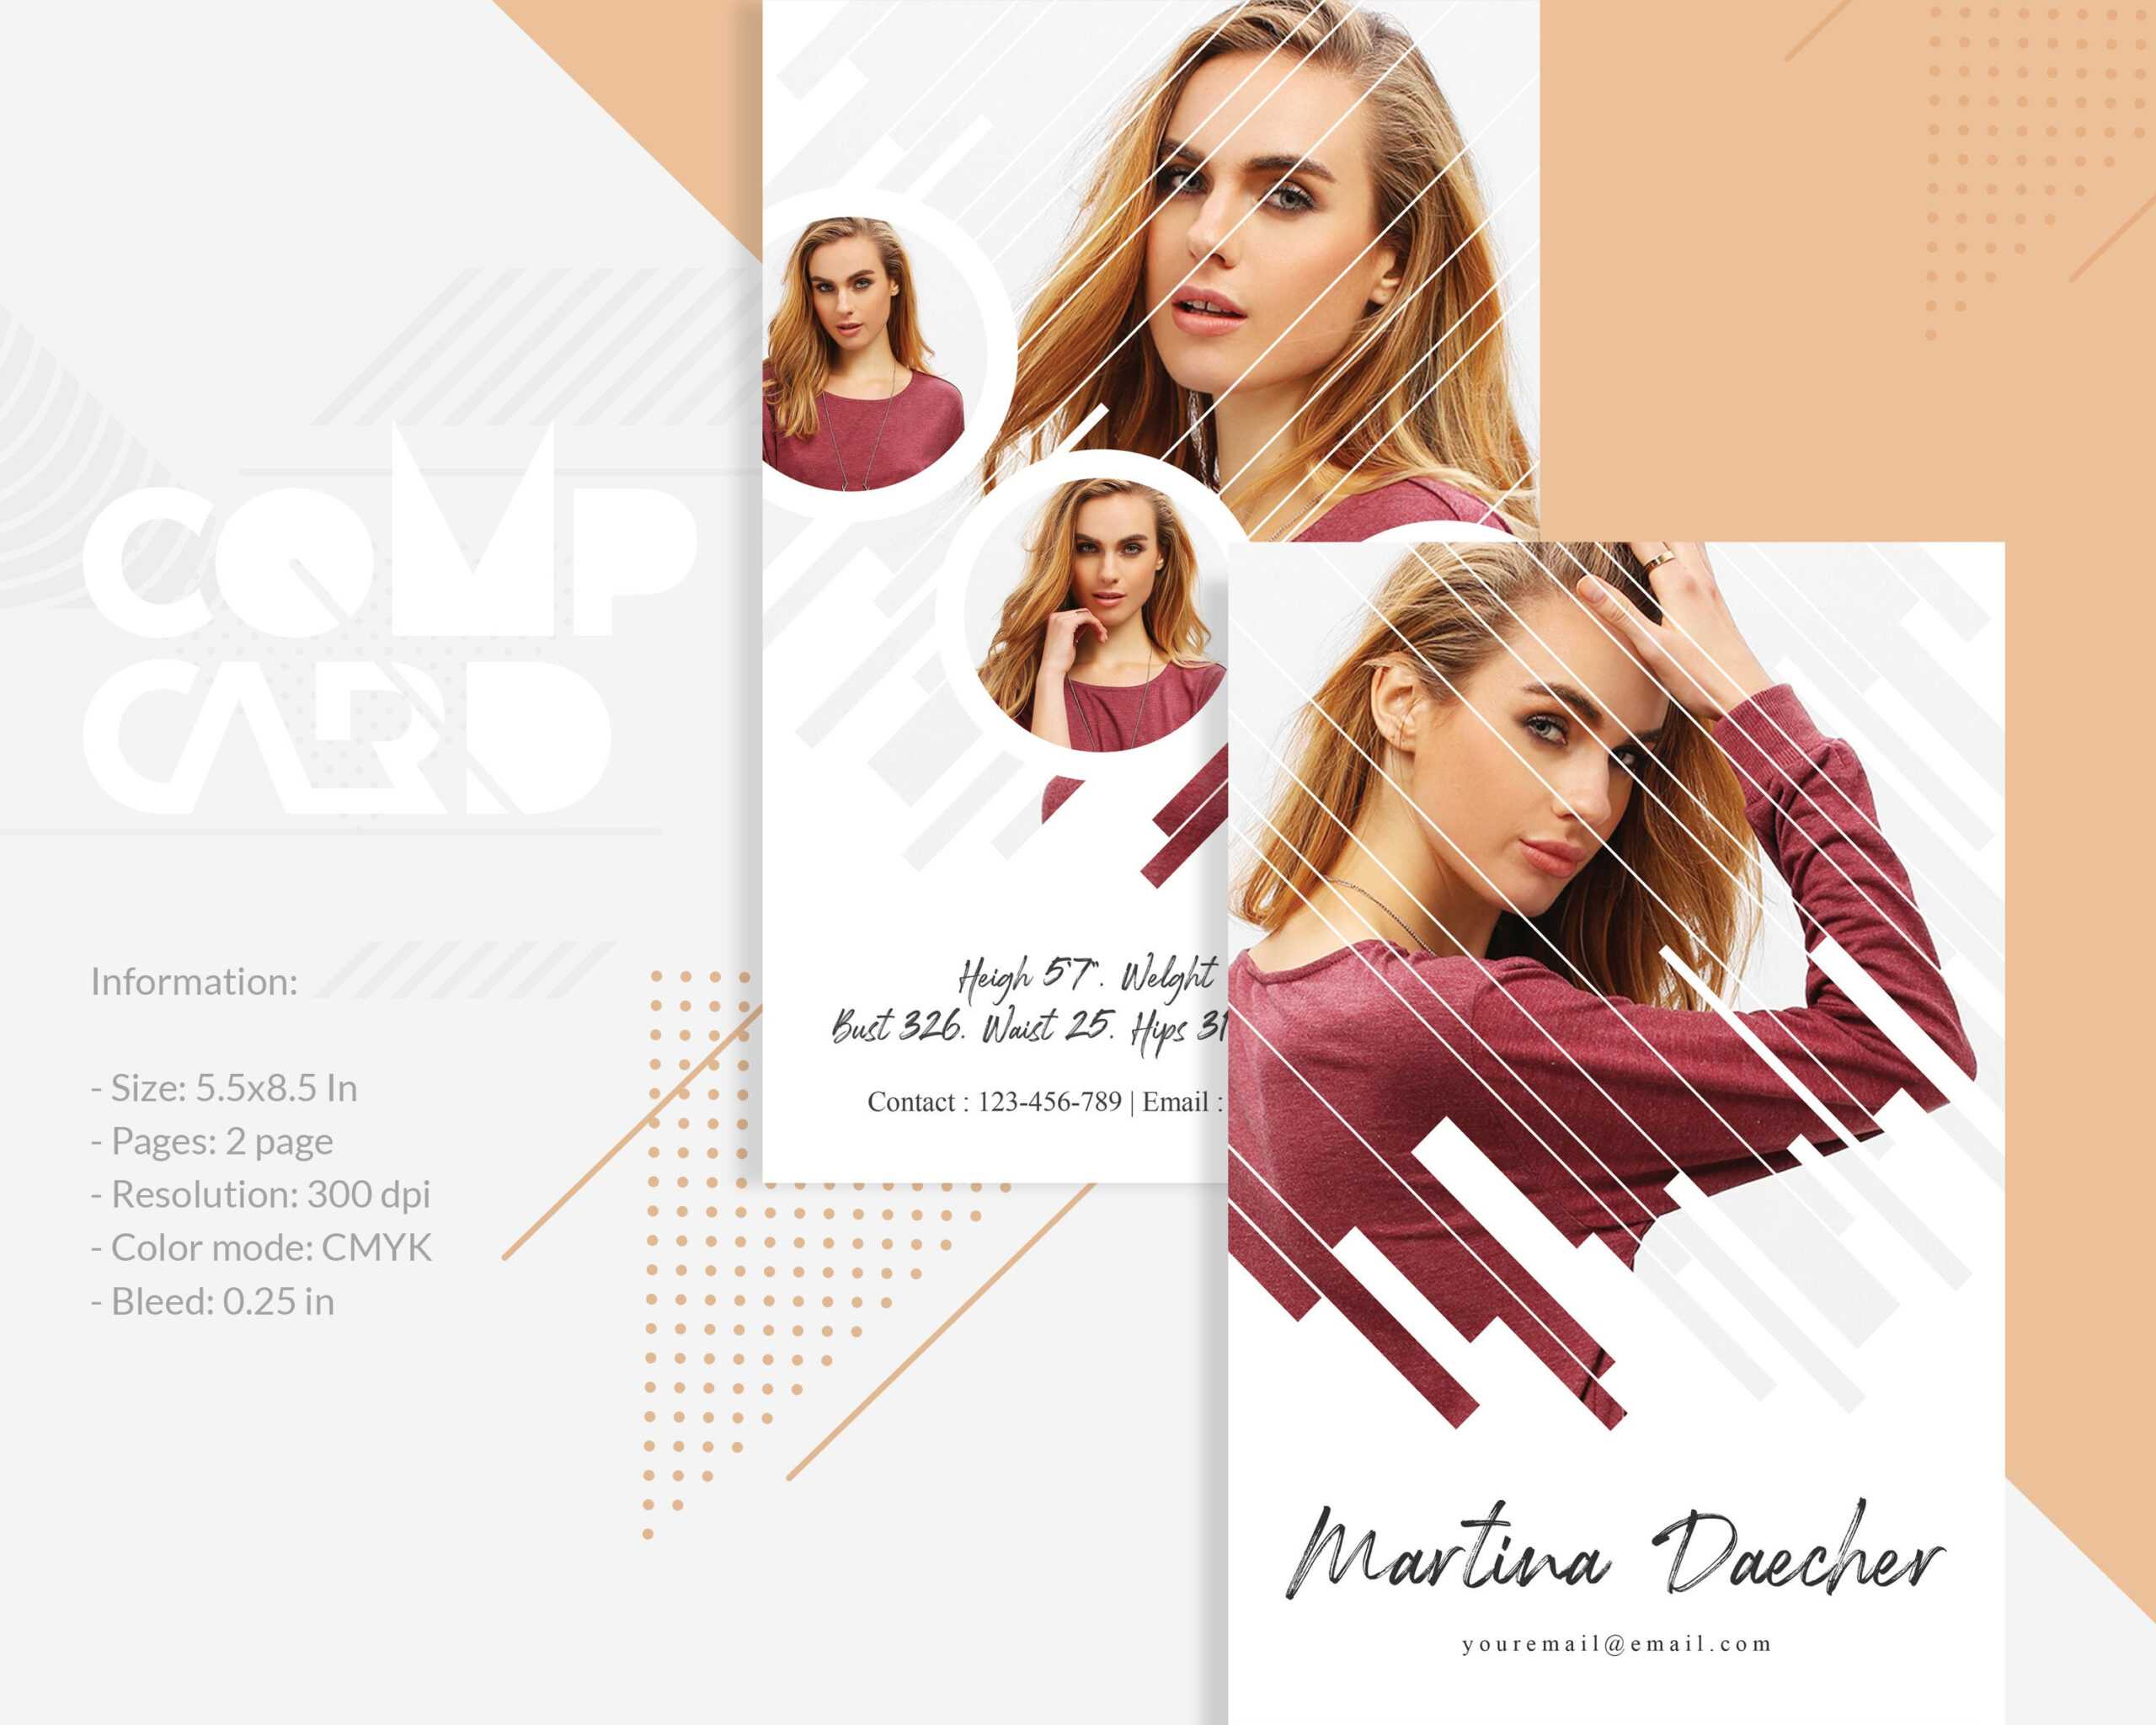 Model Comp Card Template | Modeling Comp Card | Fashion Card | Ms Word,  Photoshop And Elements Template | Instant Download Intended For Comp Card Template Download